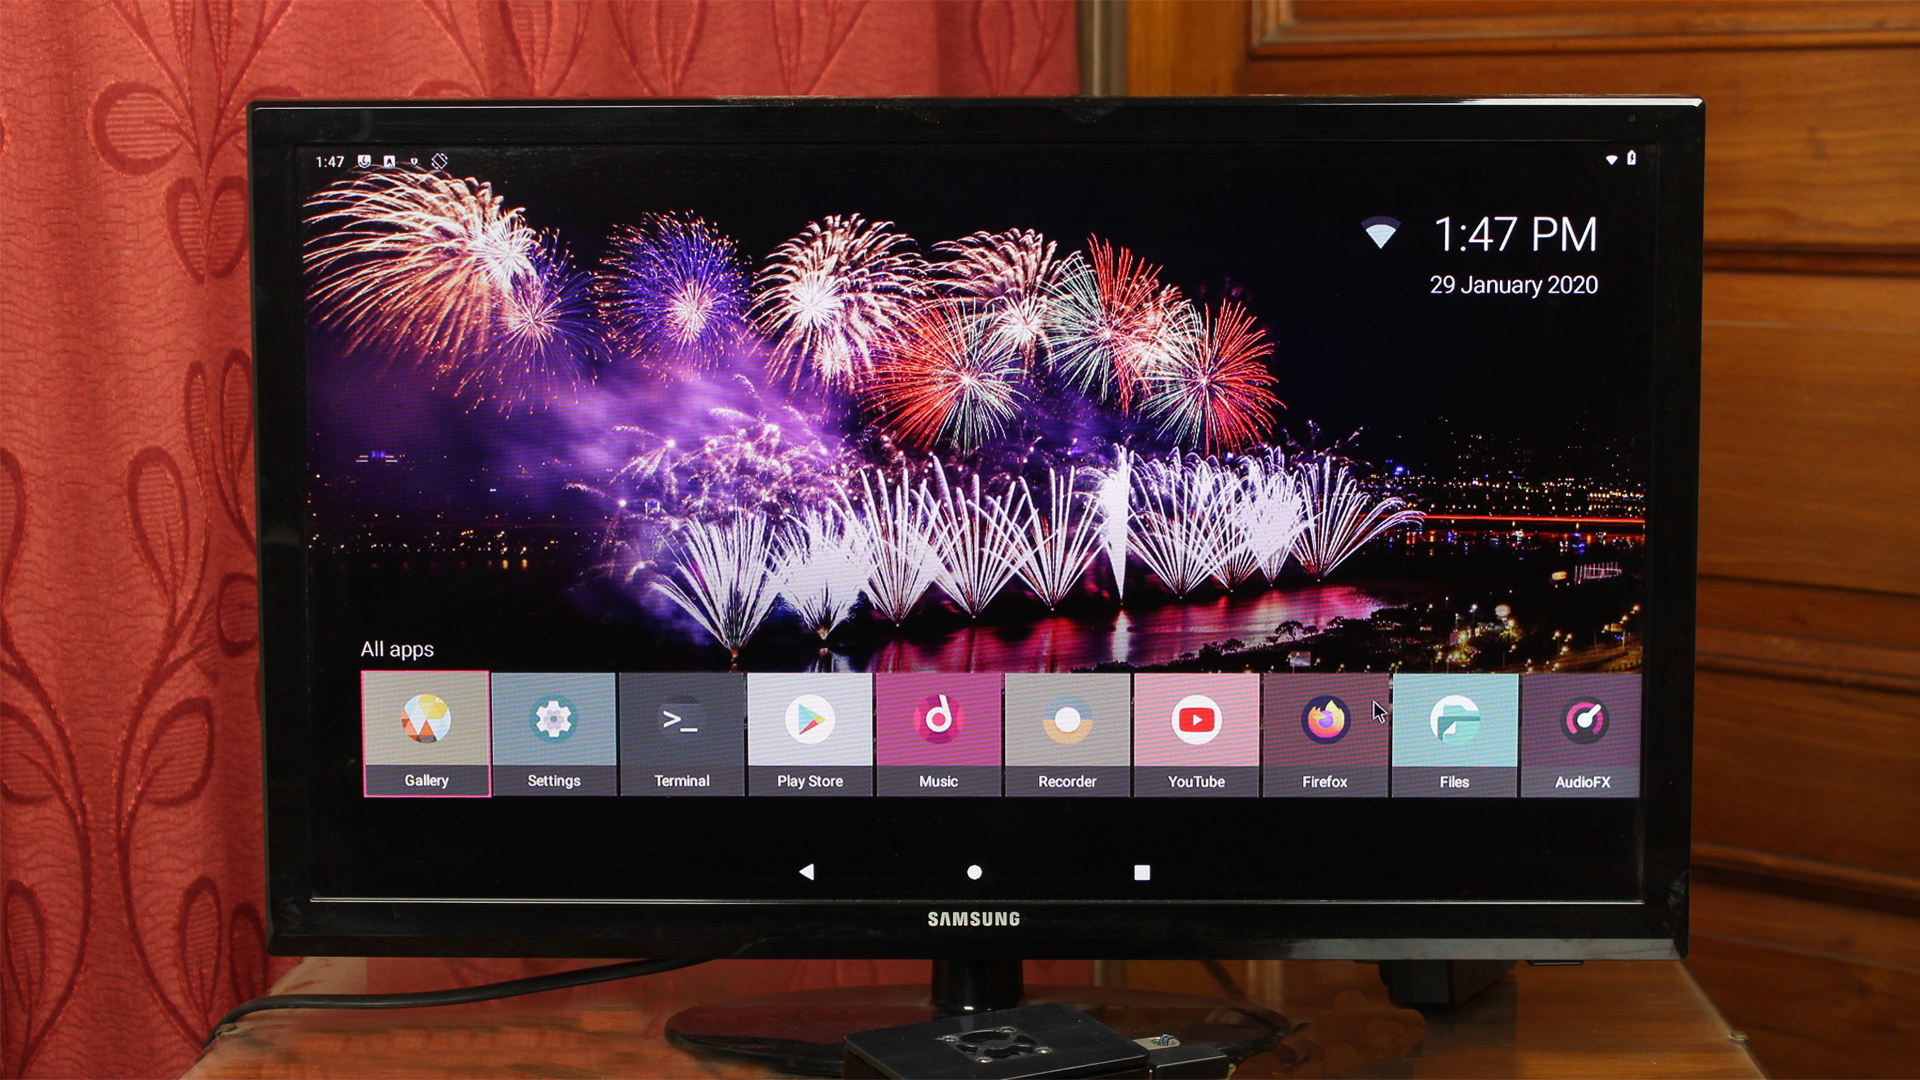 [Best] Android TV Launcher Apps that You Can Use